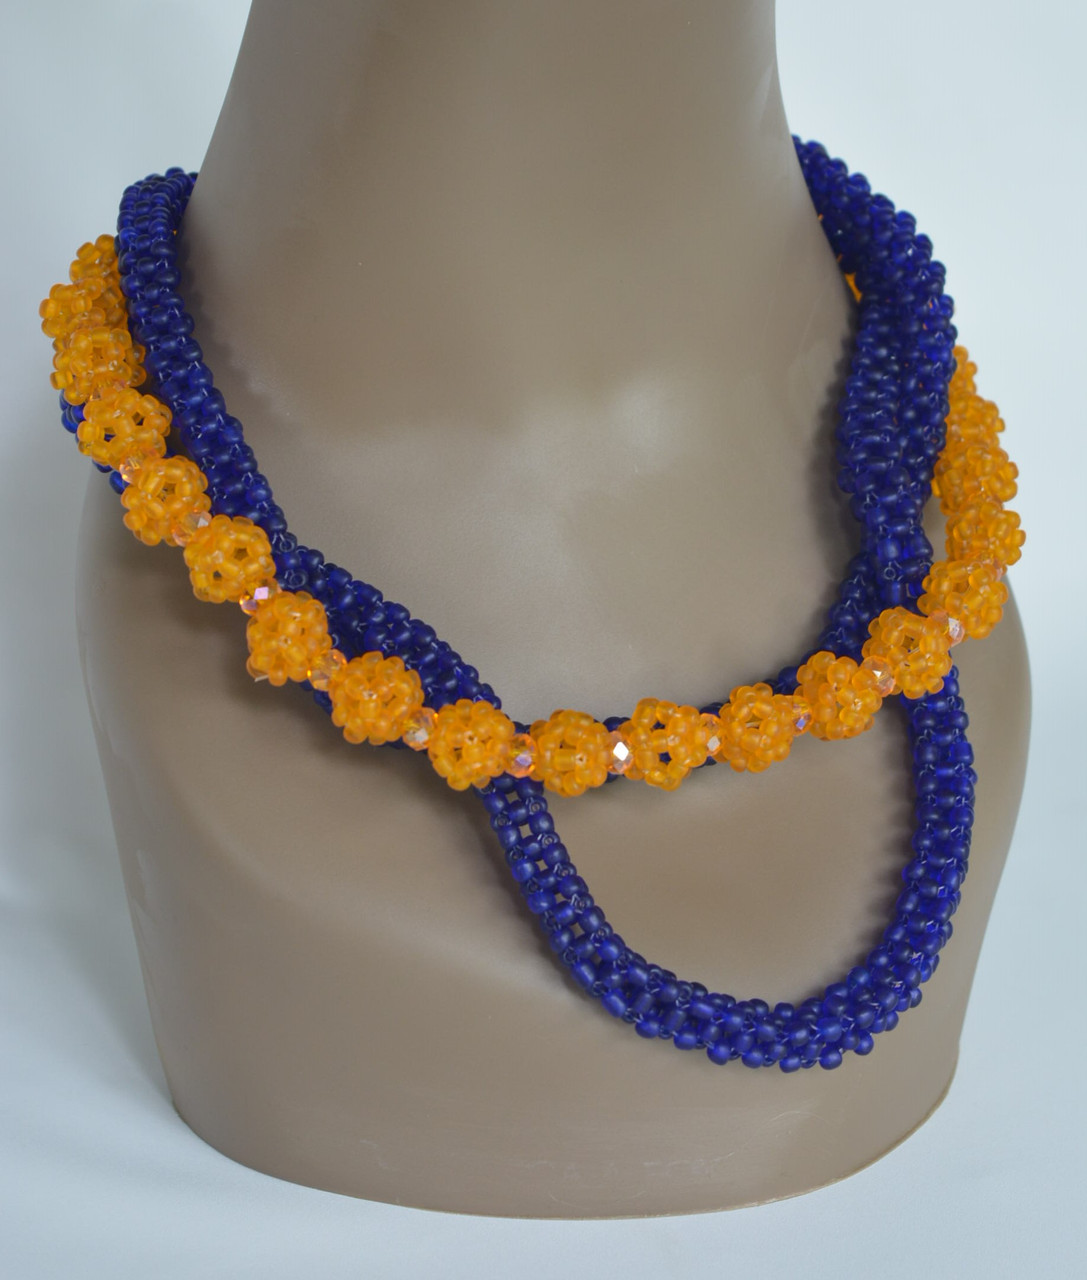 Bridal Frosted Beads & Cystals Necklace - Royal Blue & Orange